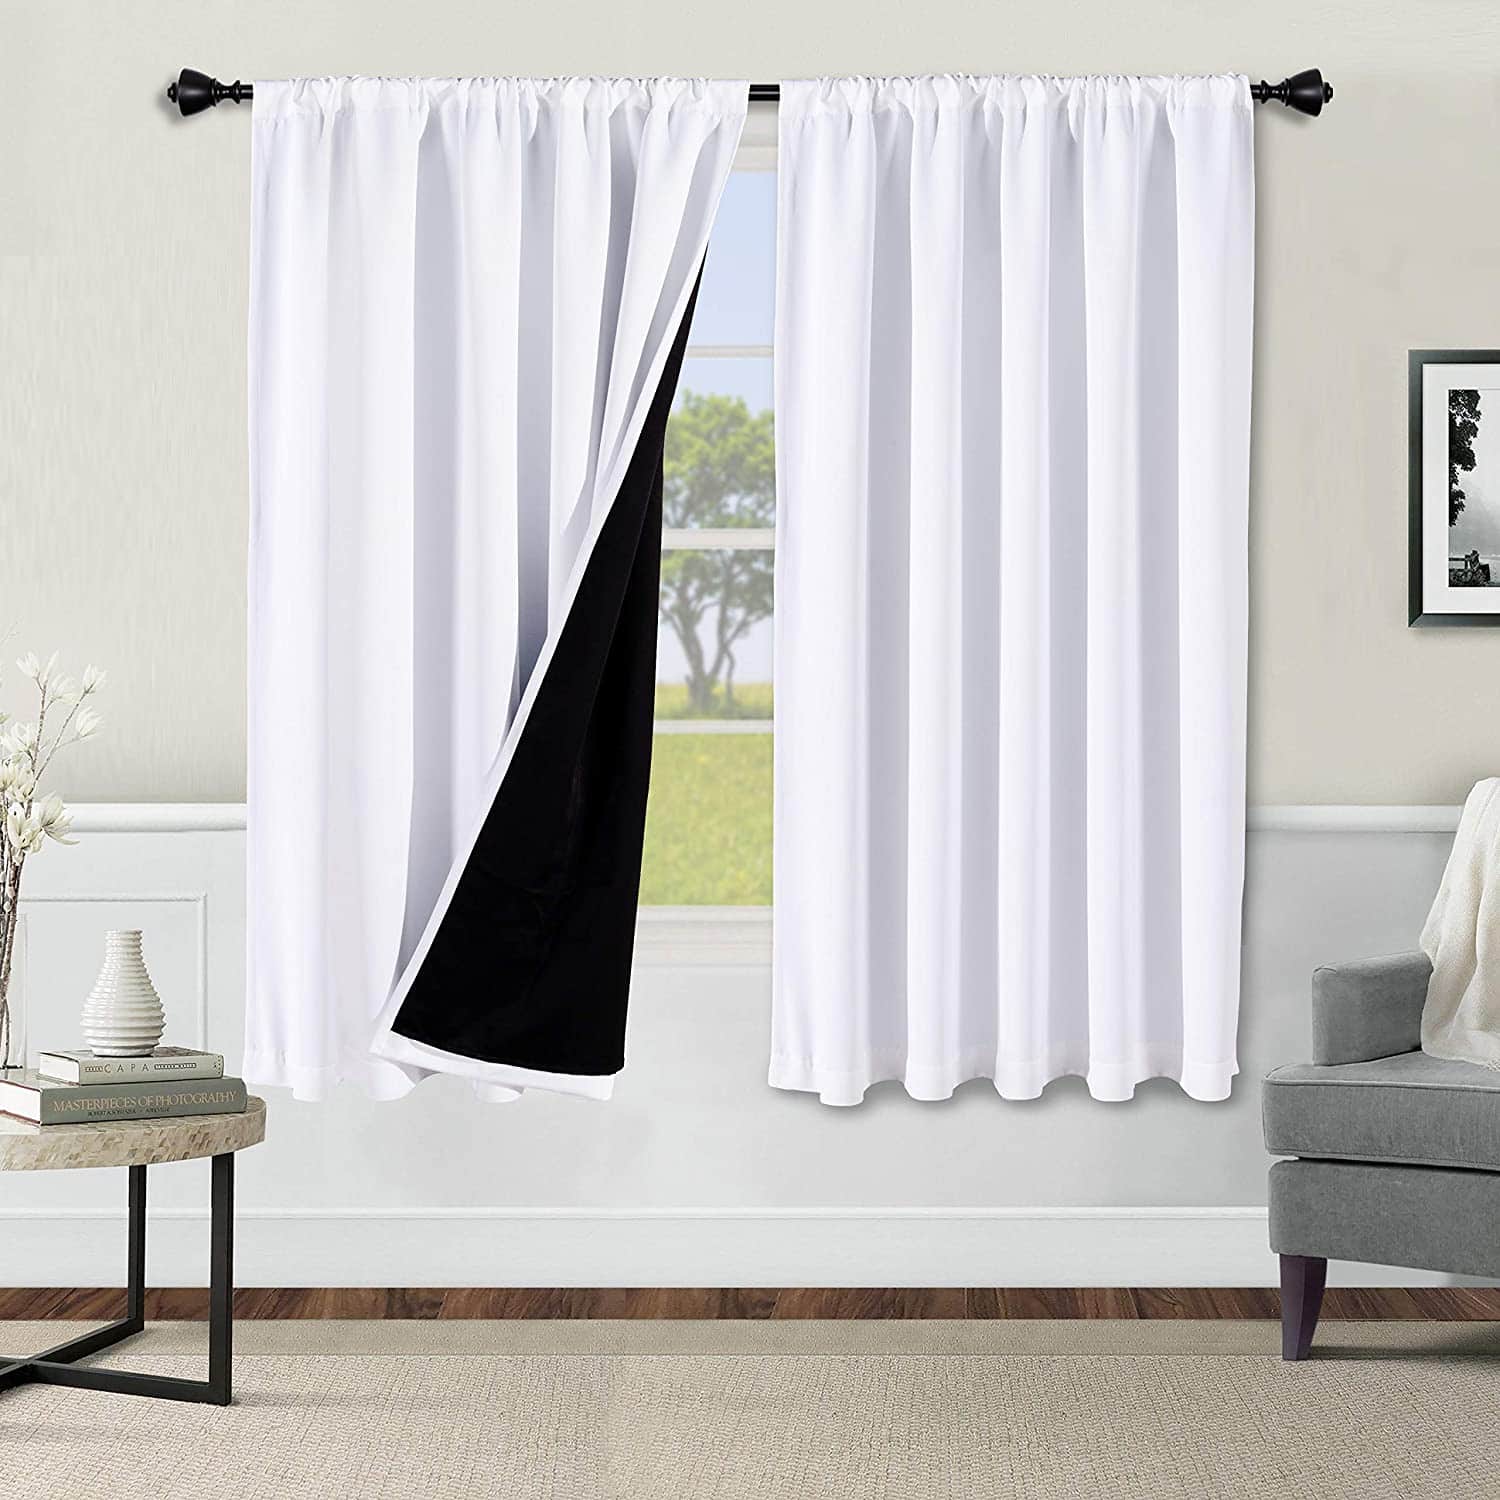 Top 10 Best Sun Blocking Curtains in 2022 Reviews | Buyer's Guide